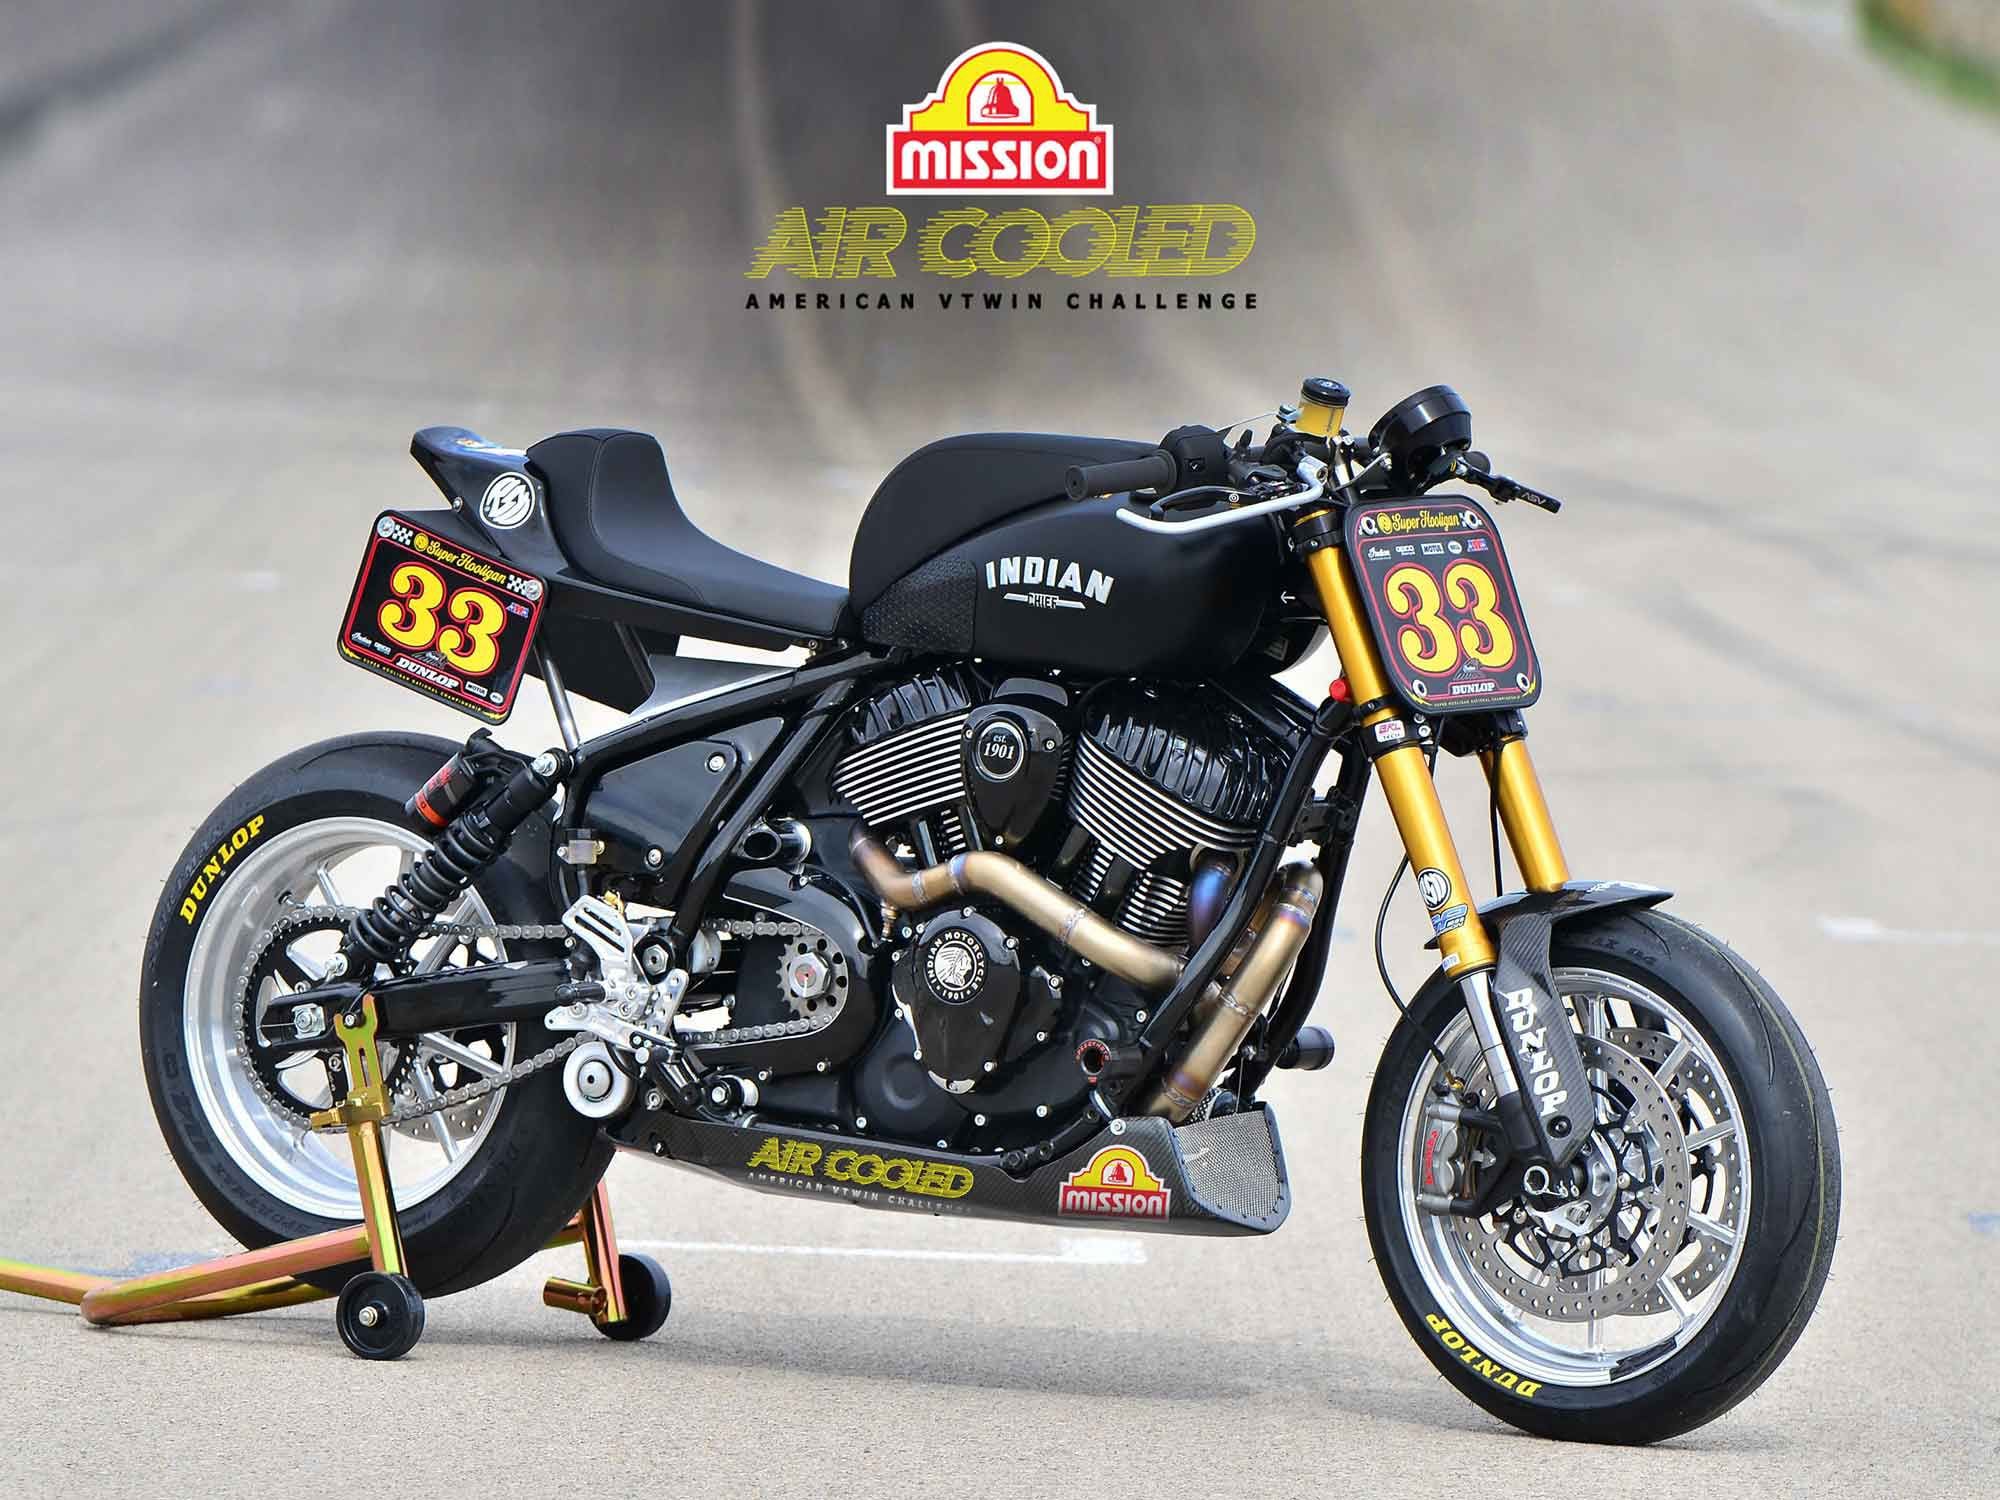 This Indian Chief was built by Roland Sands Design and raced by Rennie Scaysbrook in the Super Hooligan National Championship.